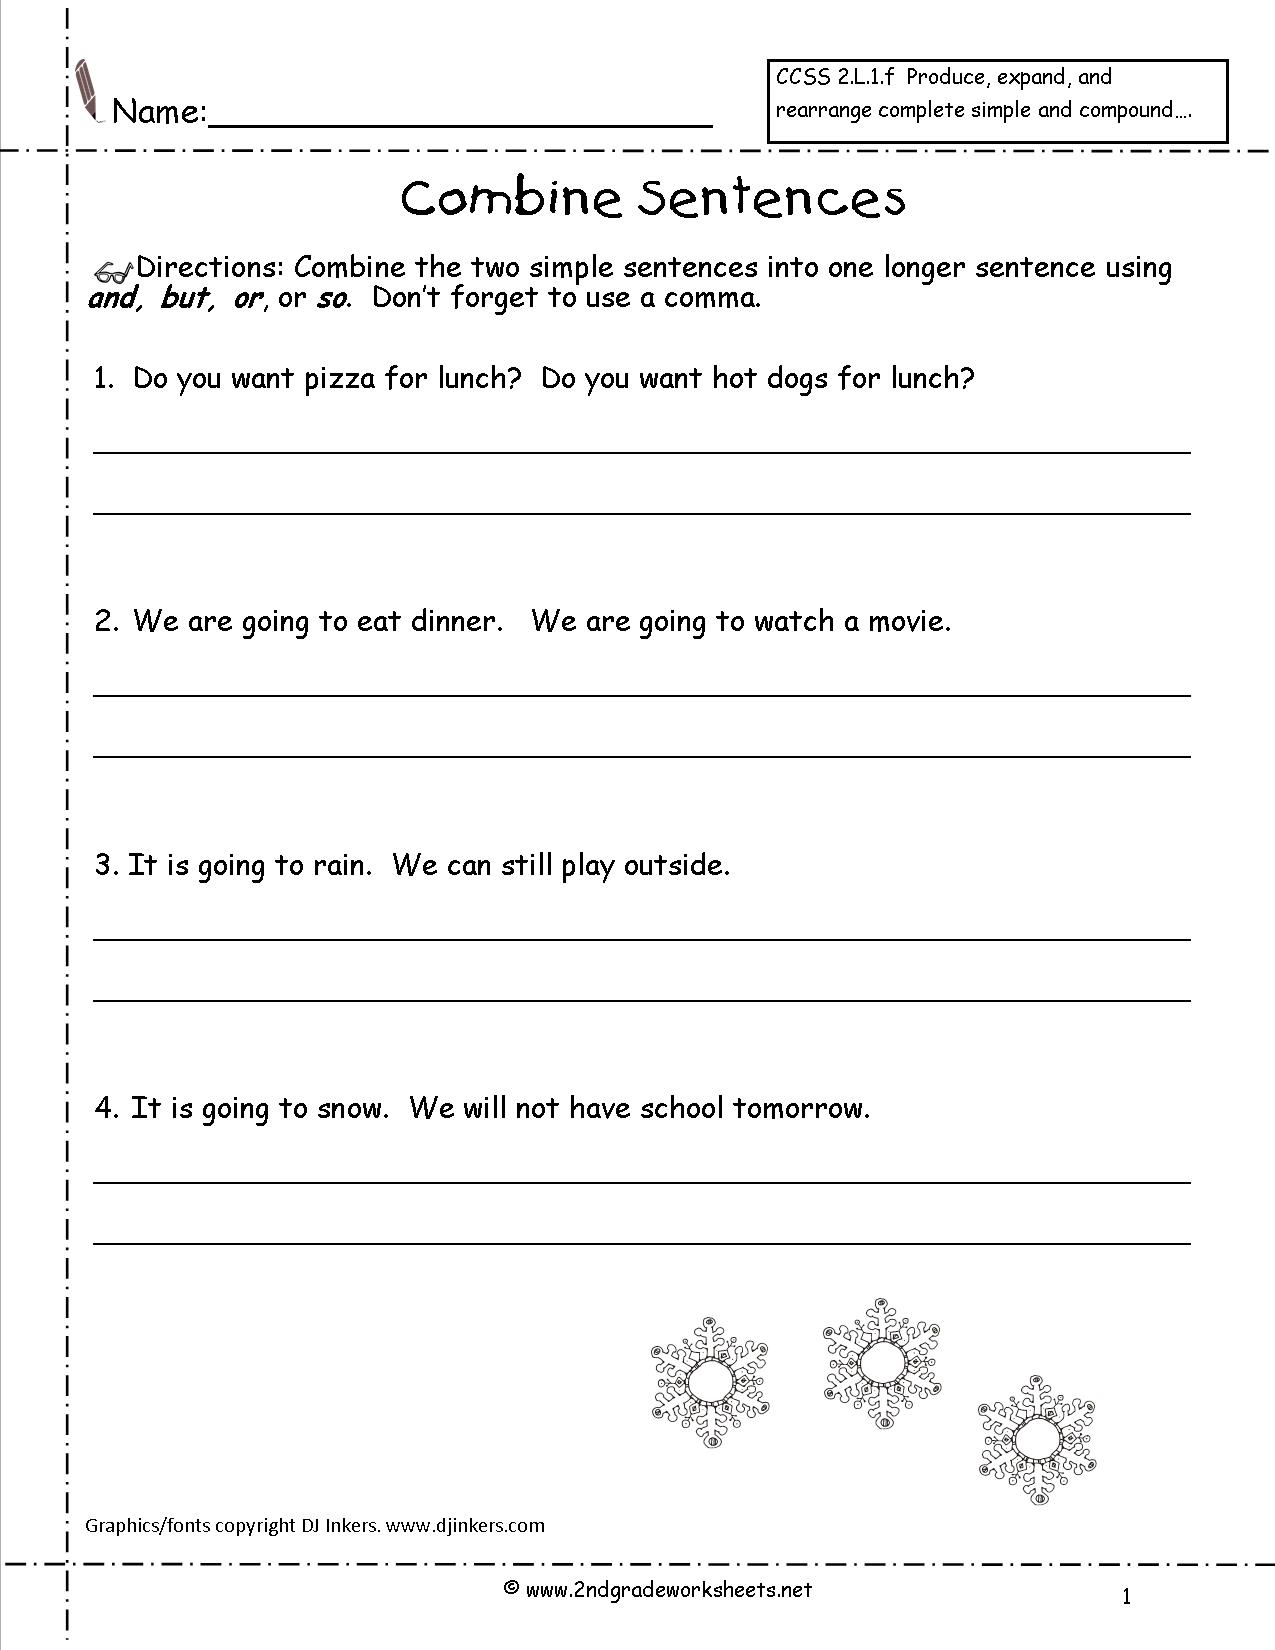 16 Best Images Of First Grade Sentence Structure Worksheets 1st Grade Sentence Structure